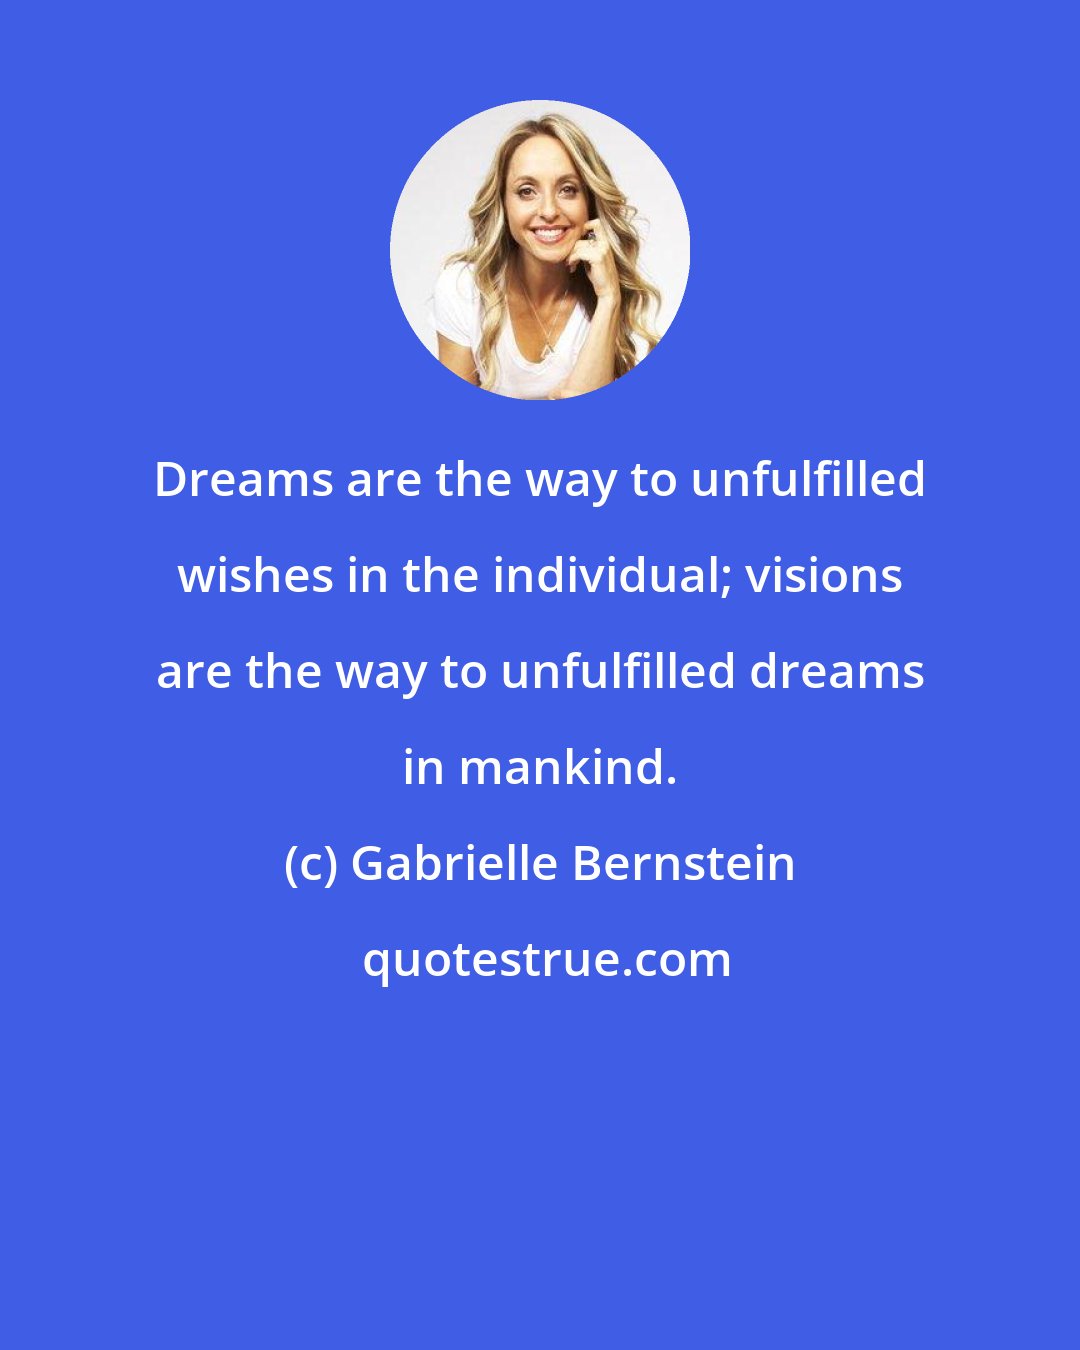 Gabrielle Bernstein: Dreams are the way to unfulfilled wishes in the individual; visions are the way to unfulfilled dreams in mankind.